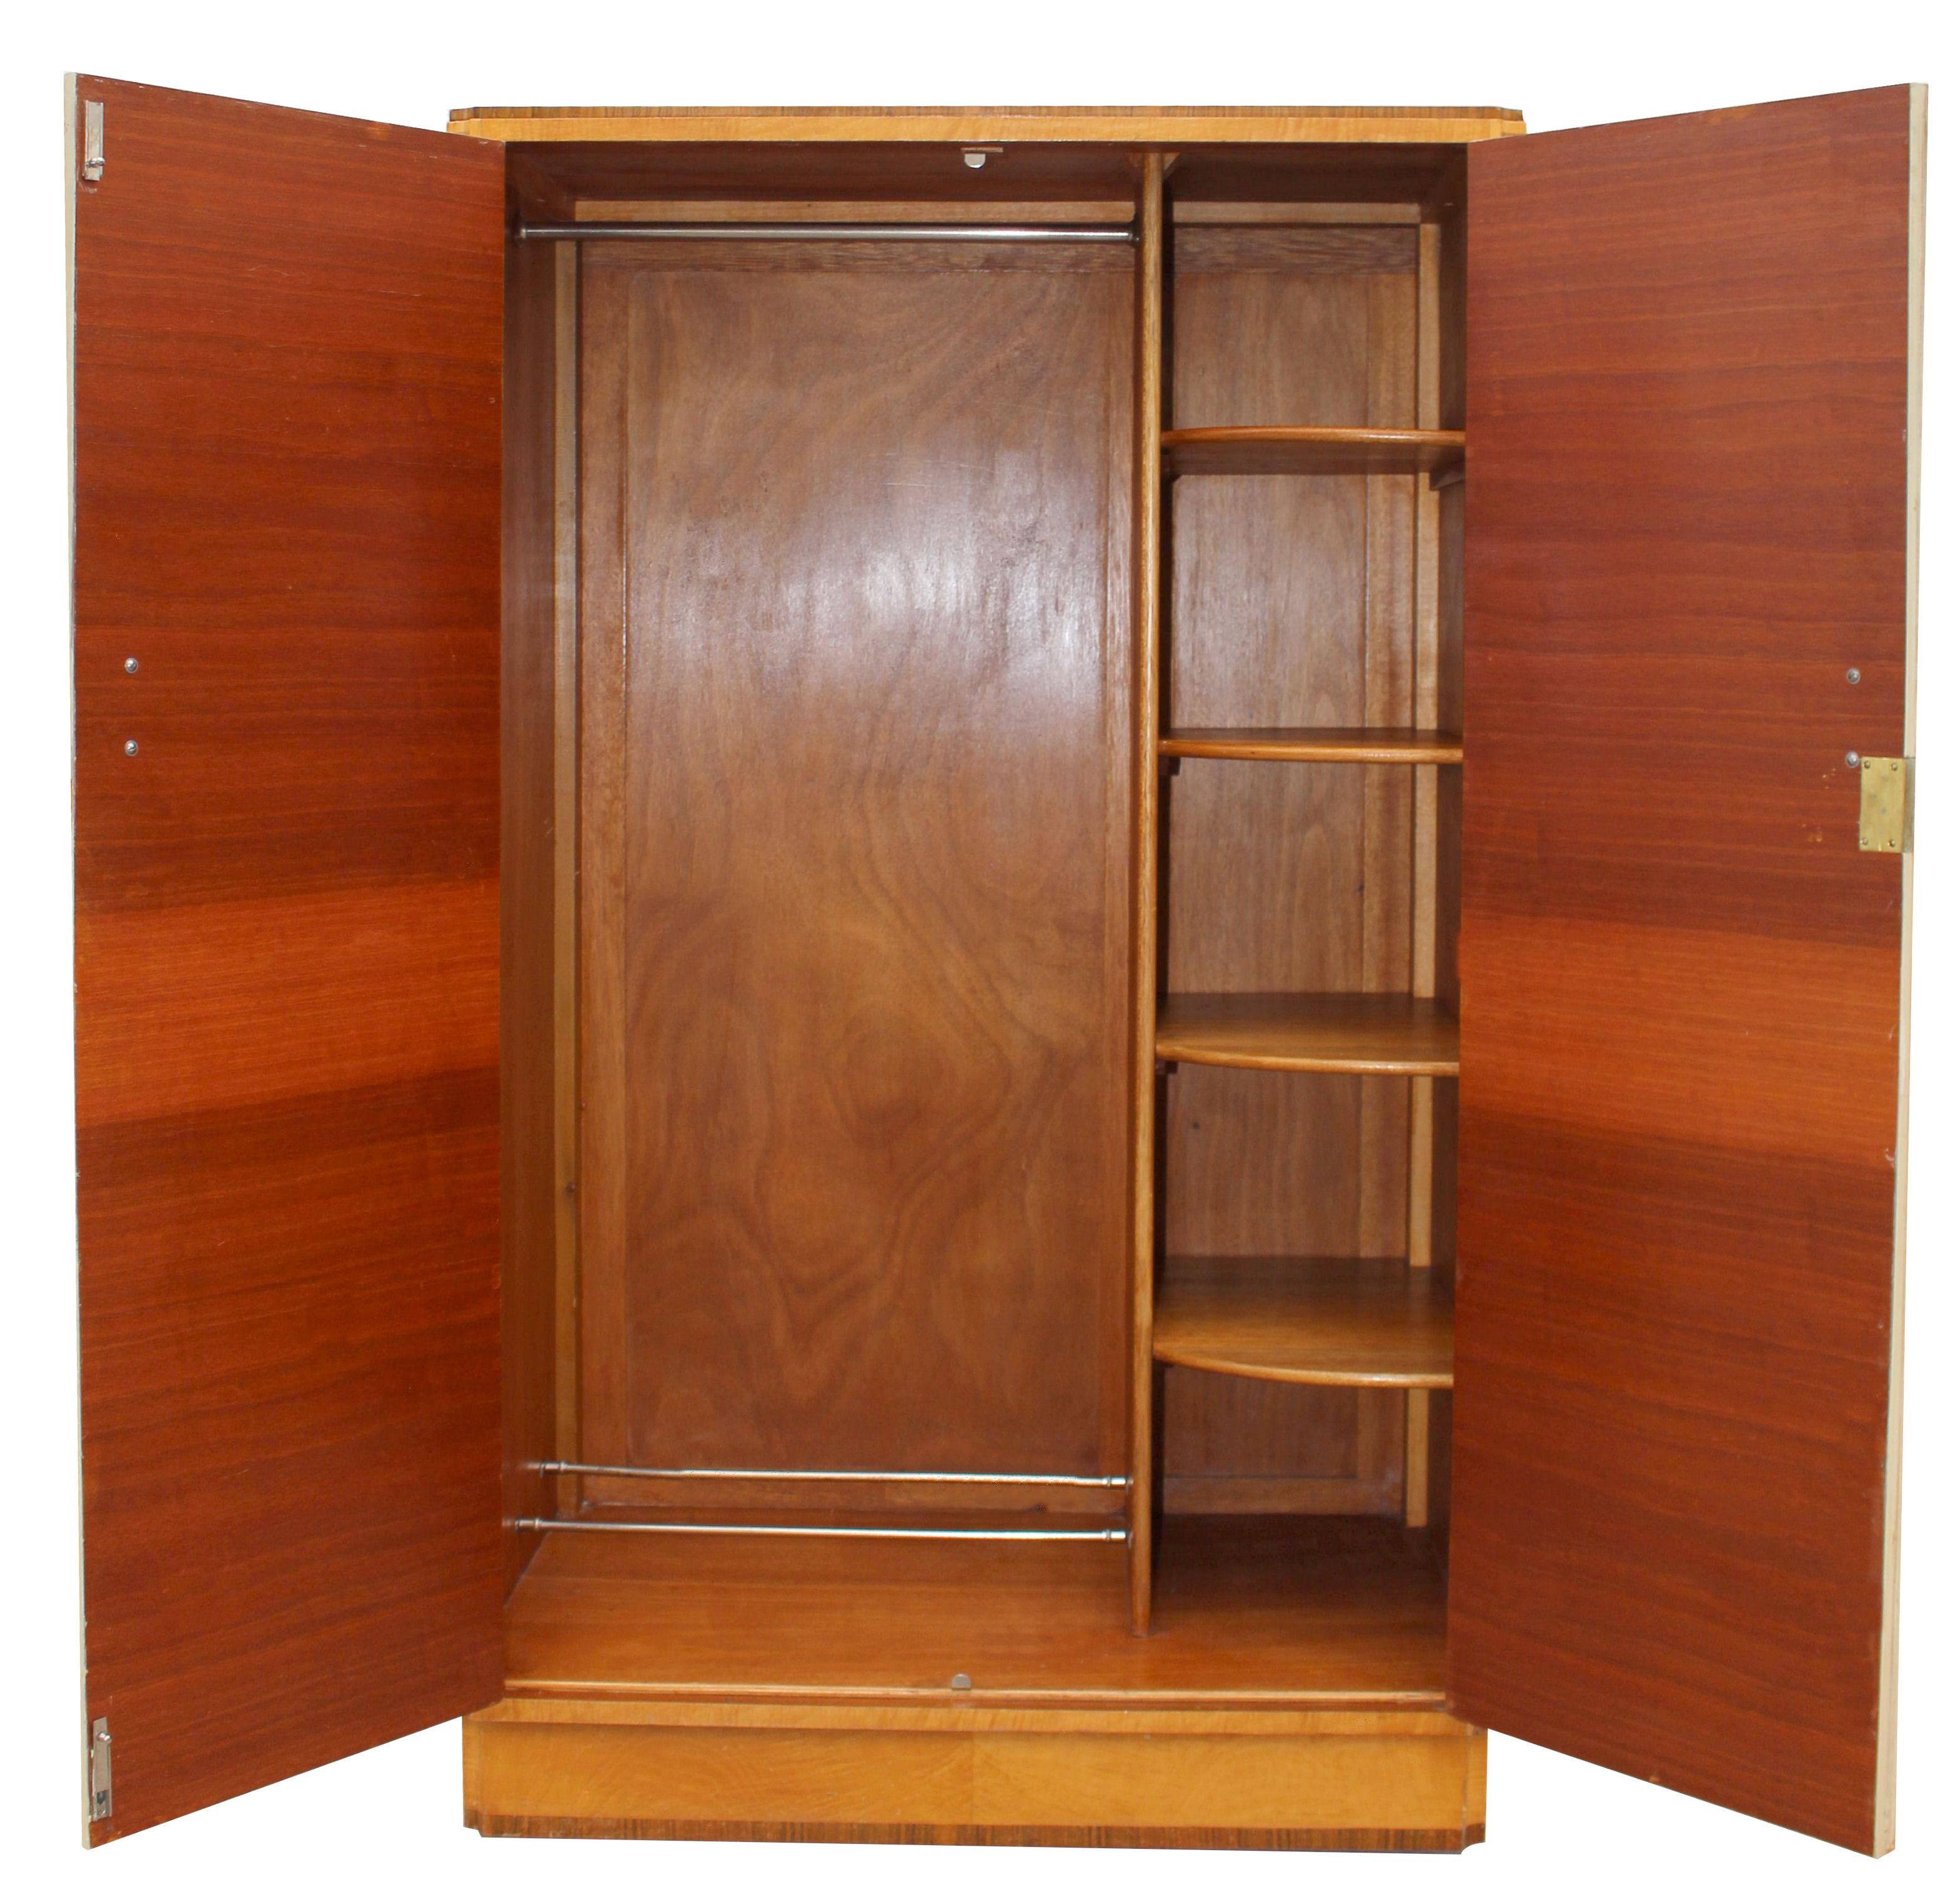 This beautiful wardrobe exudes quality and style. Book paged veneers in a true blonde tiger grain birch with contrasting straight grain walnut veneer banding to the top and base. Lovely detailing to the corners too which are inverted with a scallop